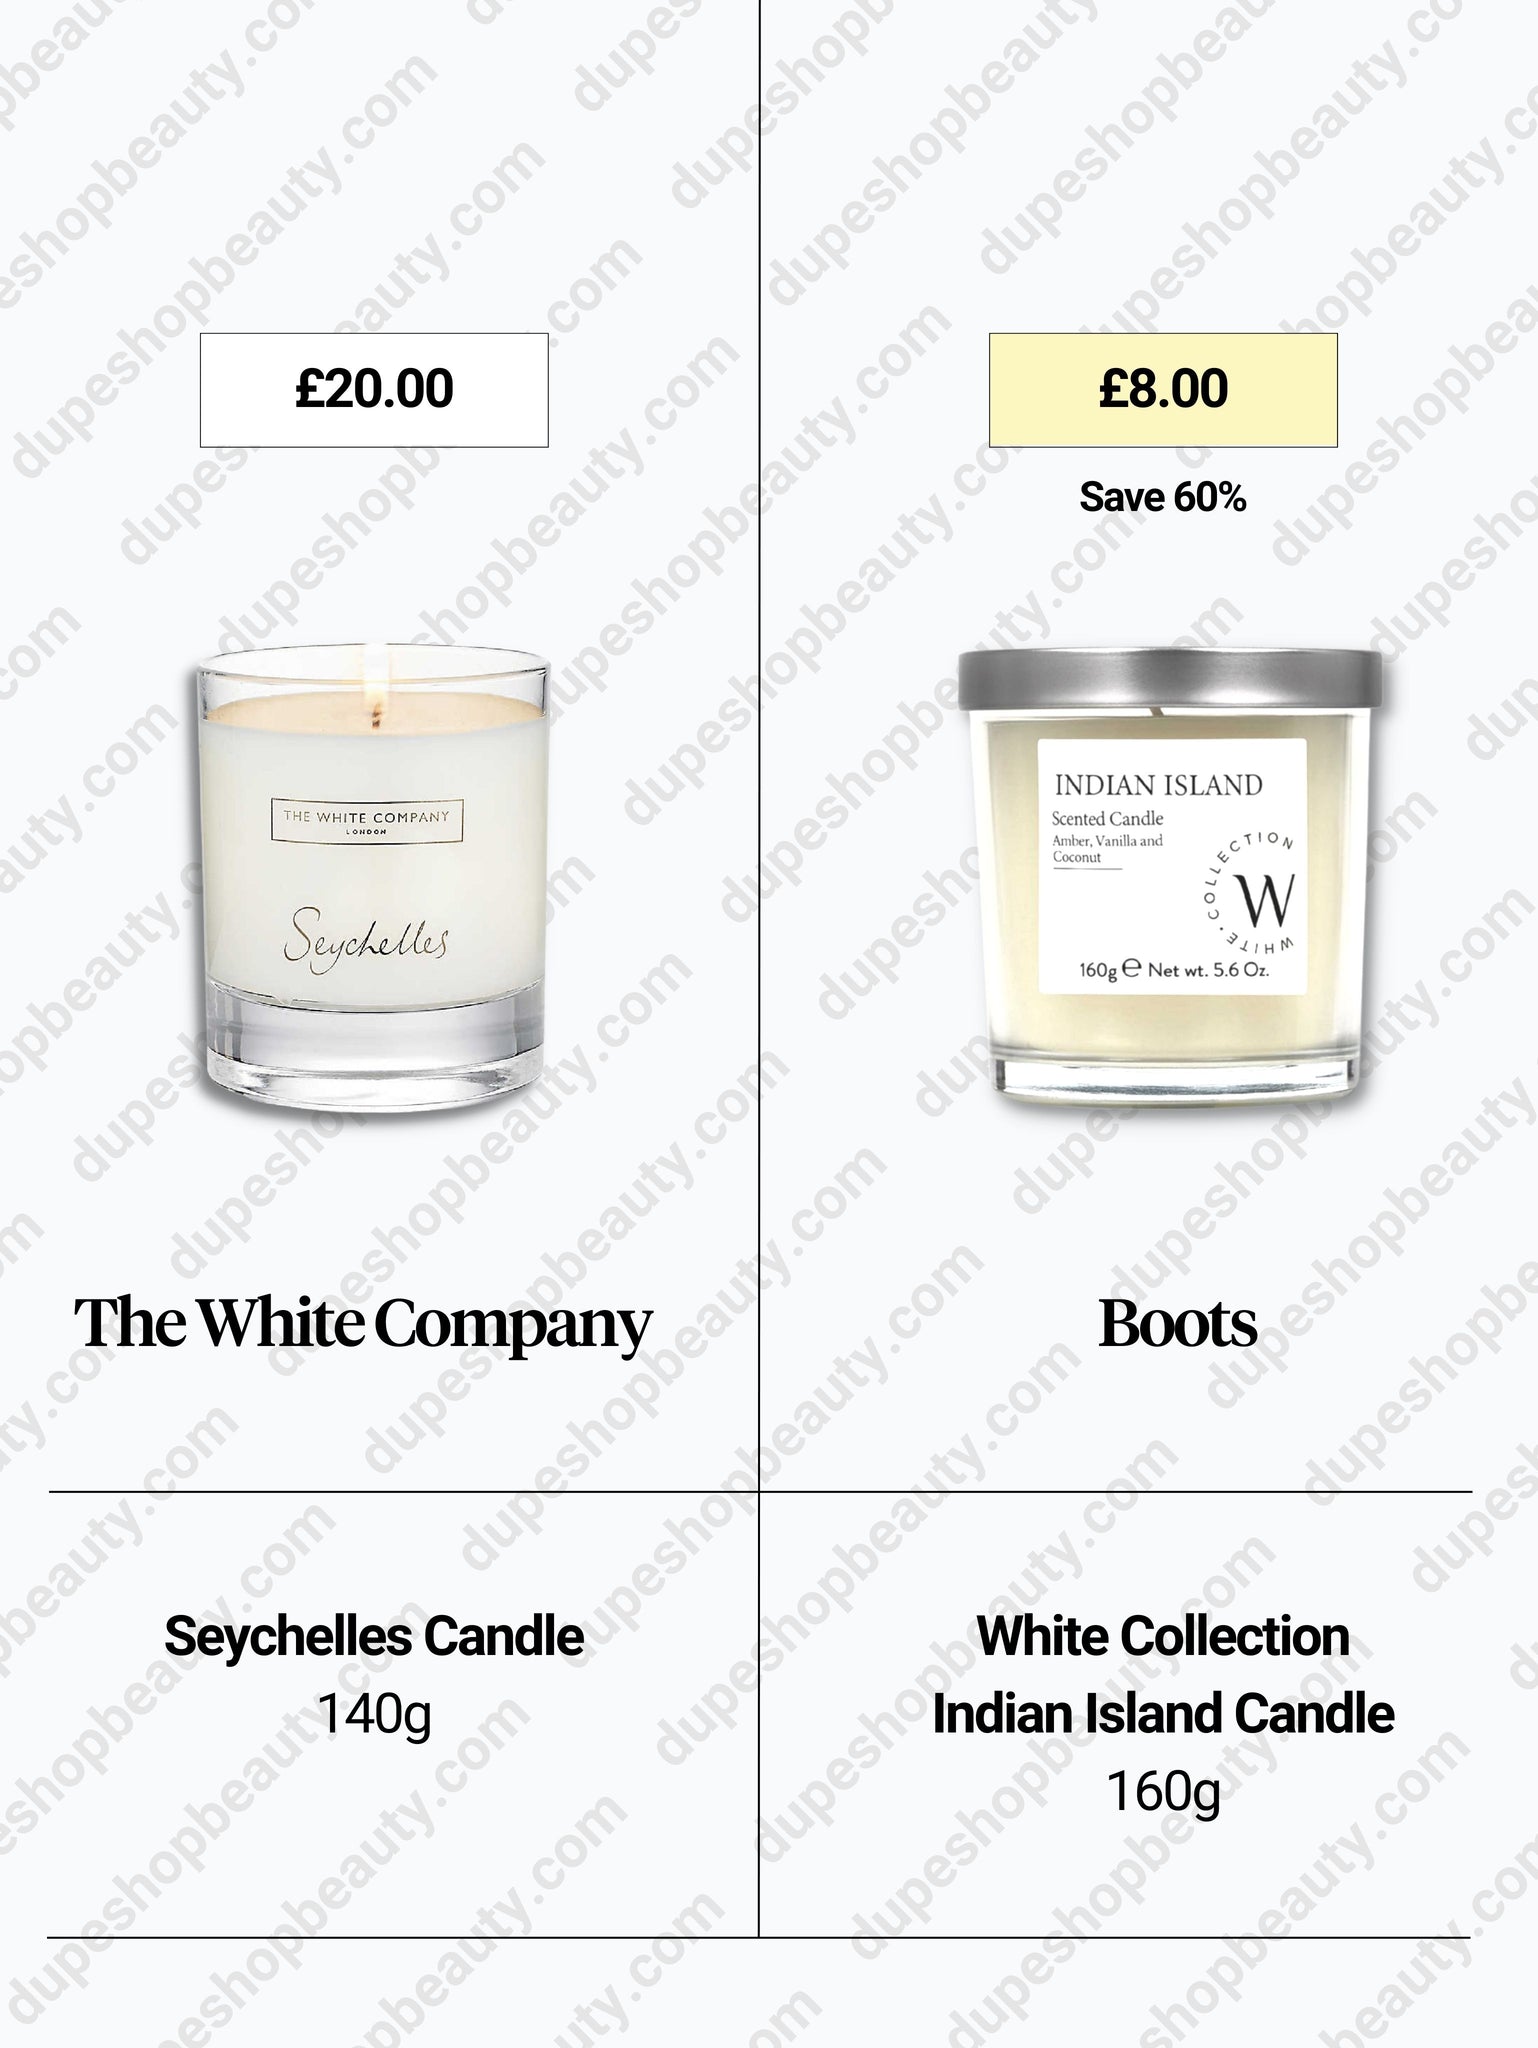 White Company Seychelles Candle vs Boots Candle